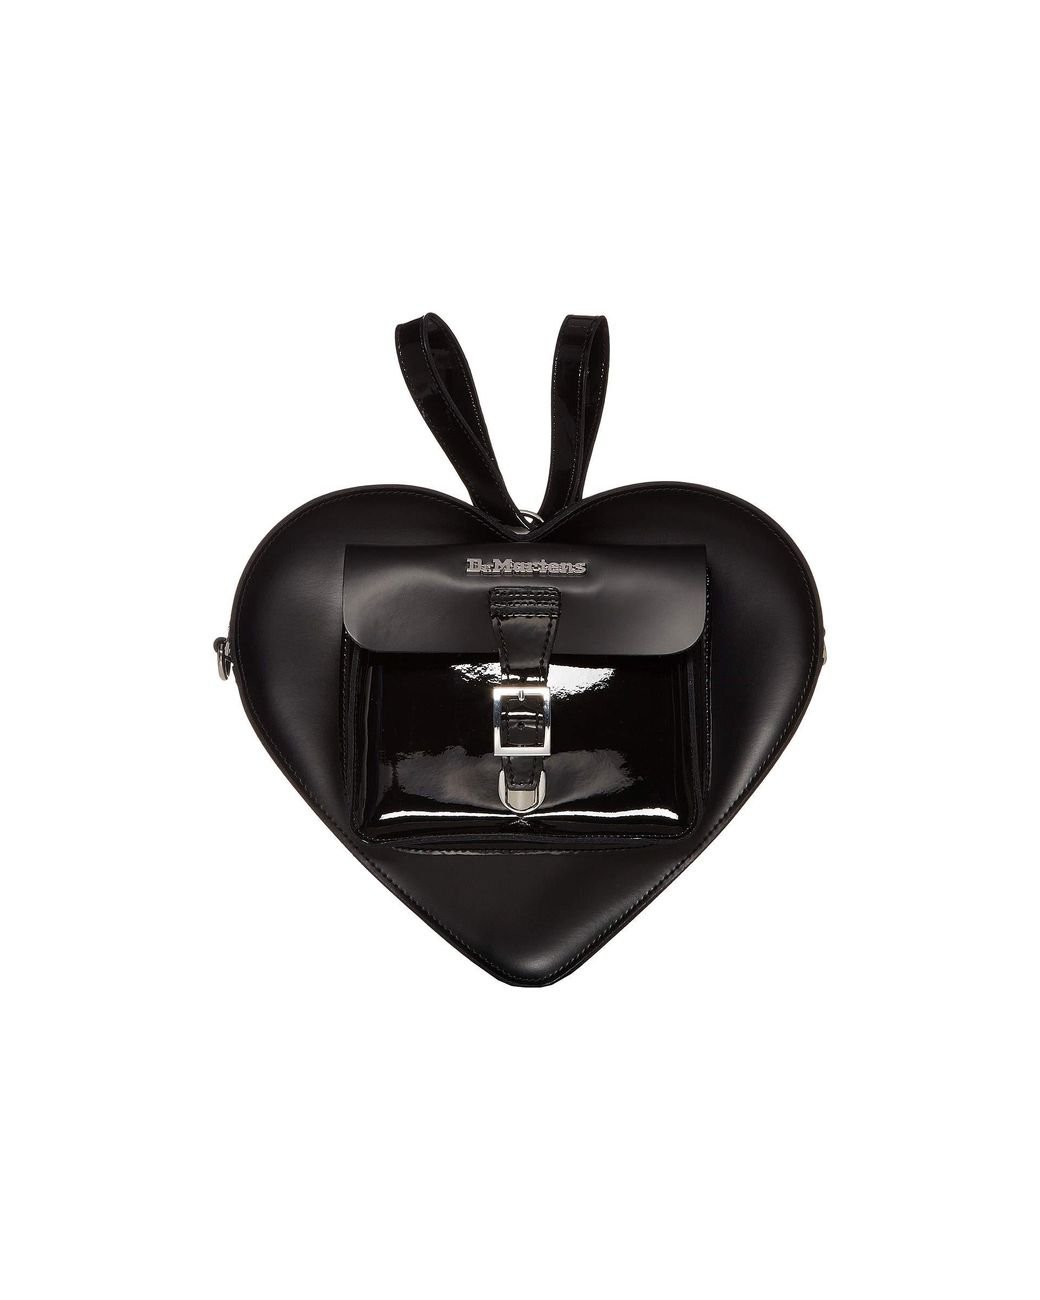 Dr. Martens Heart Shaped Leather Backpack in Black | Lyst